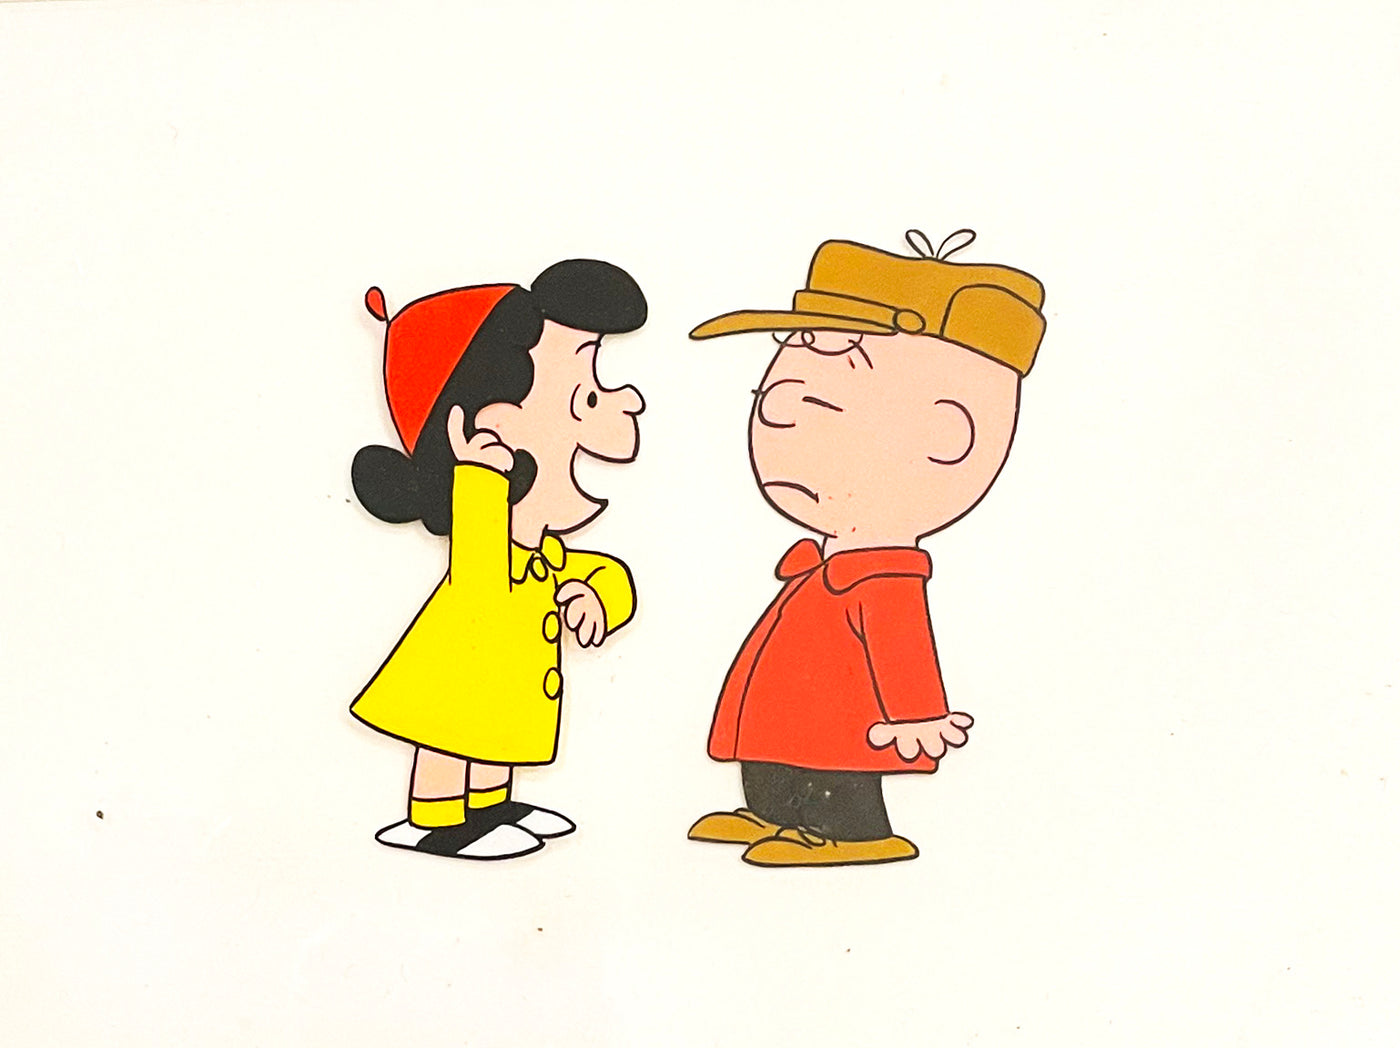 Original Peanuts Production Cel featuring Charlie Brown and Lucy van Pelt